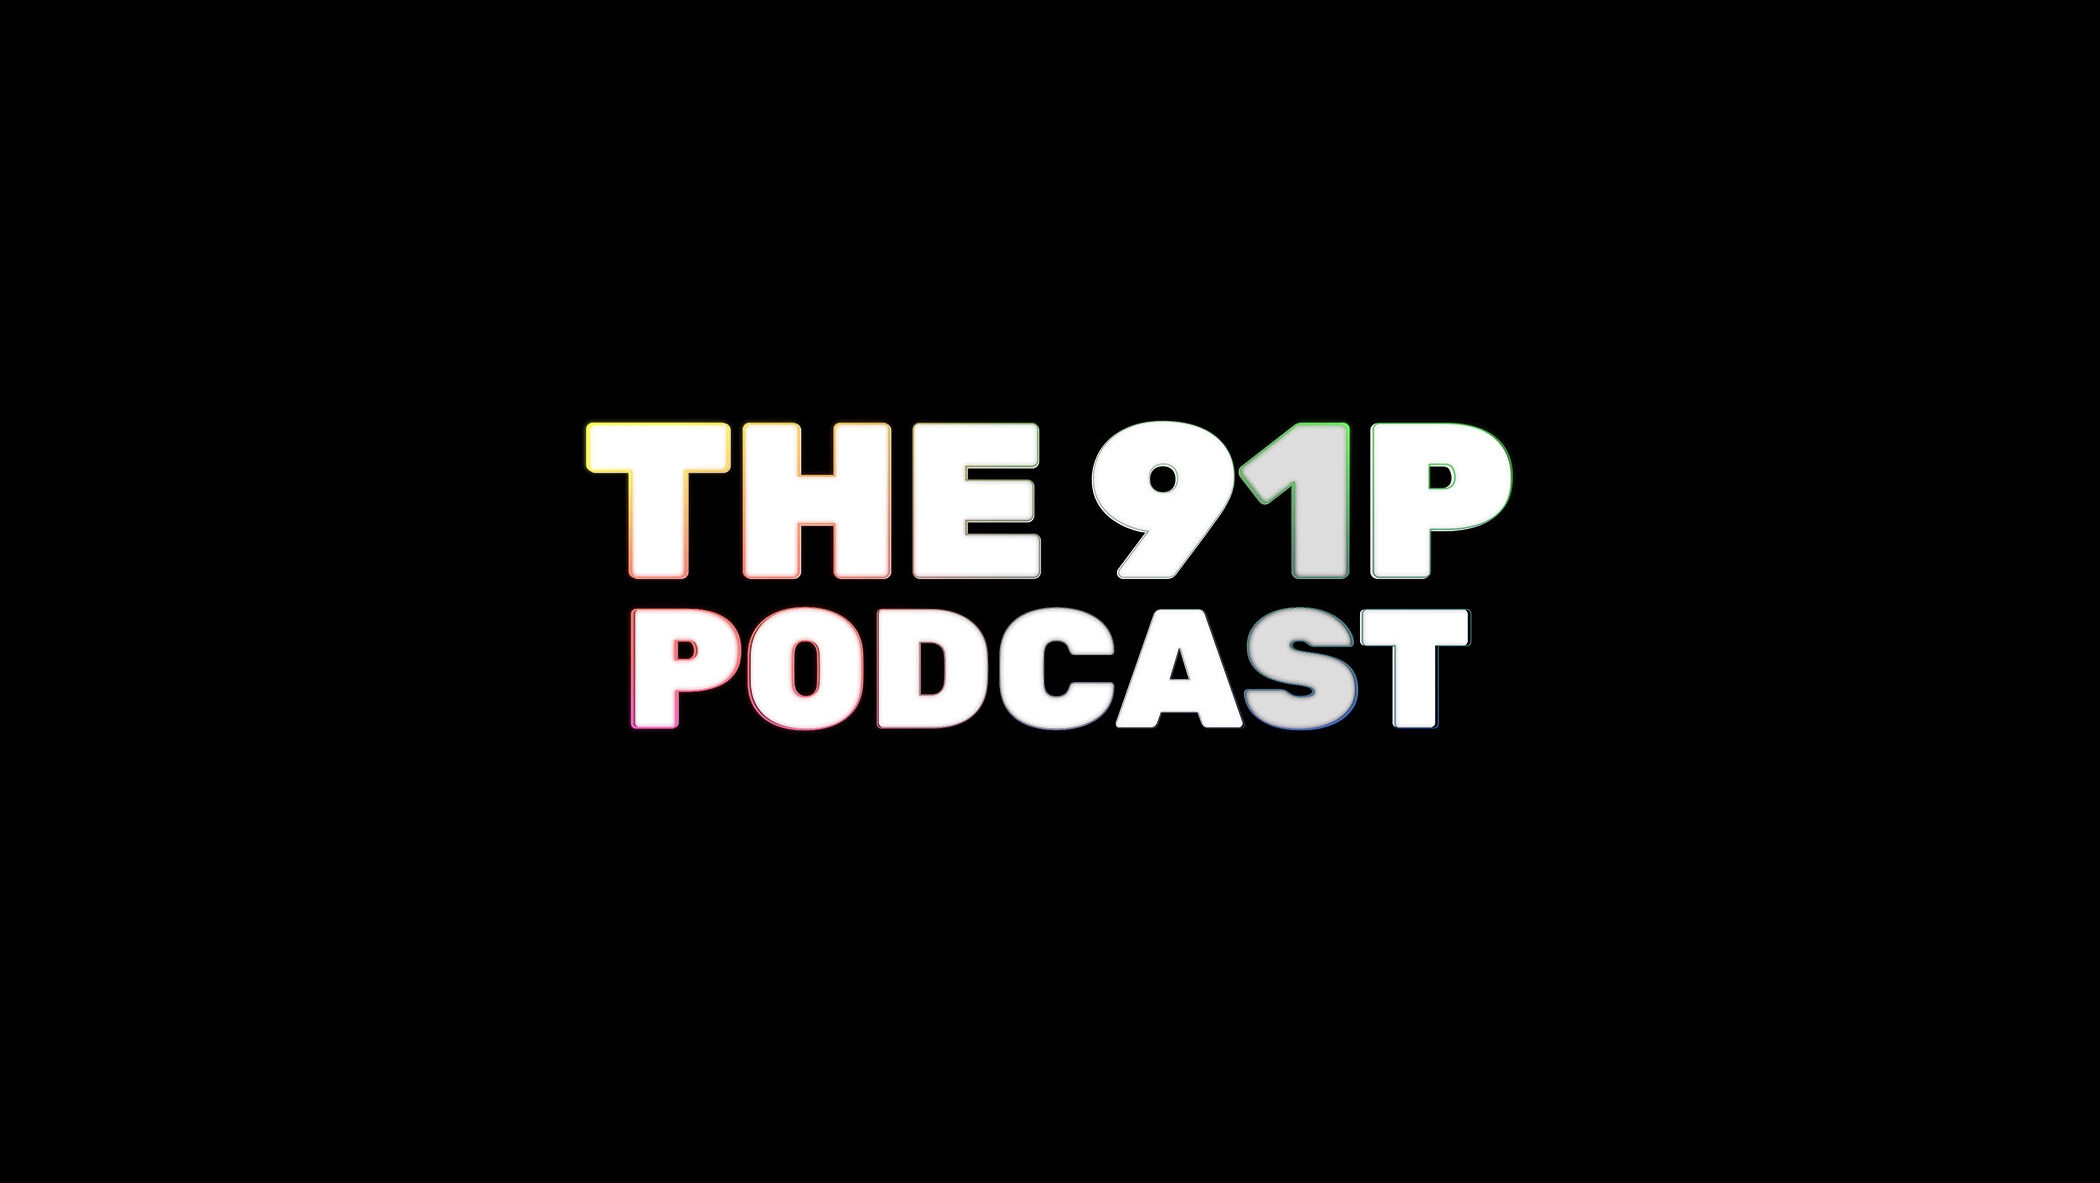 The 91P Podcast